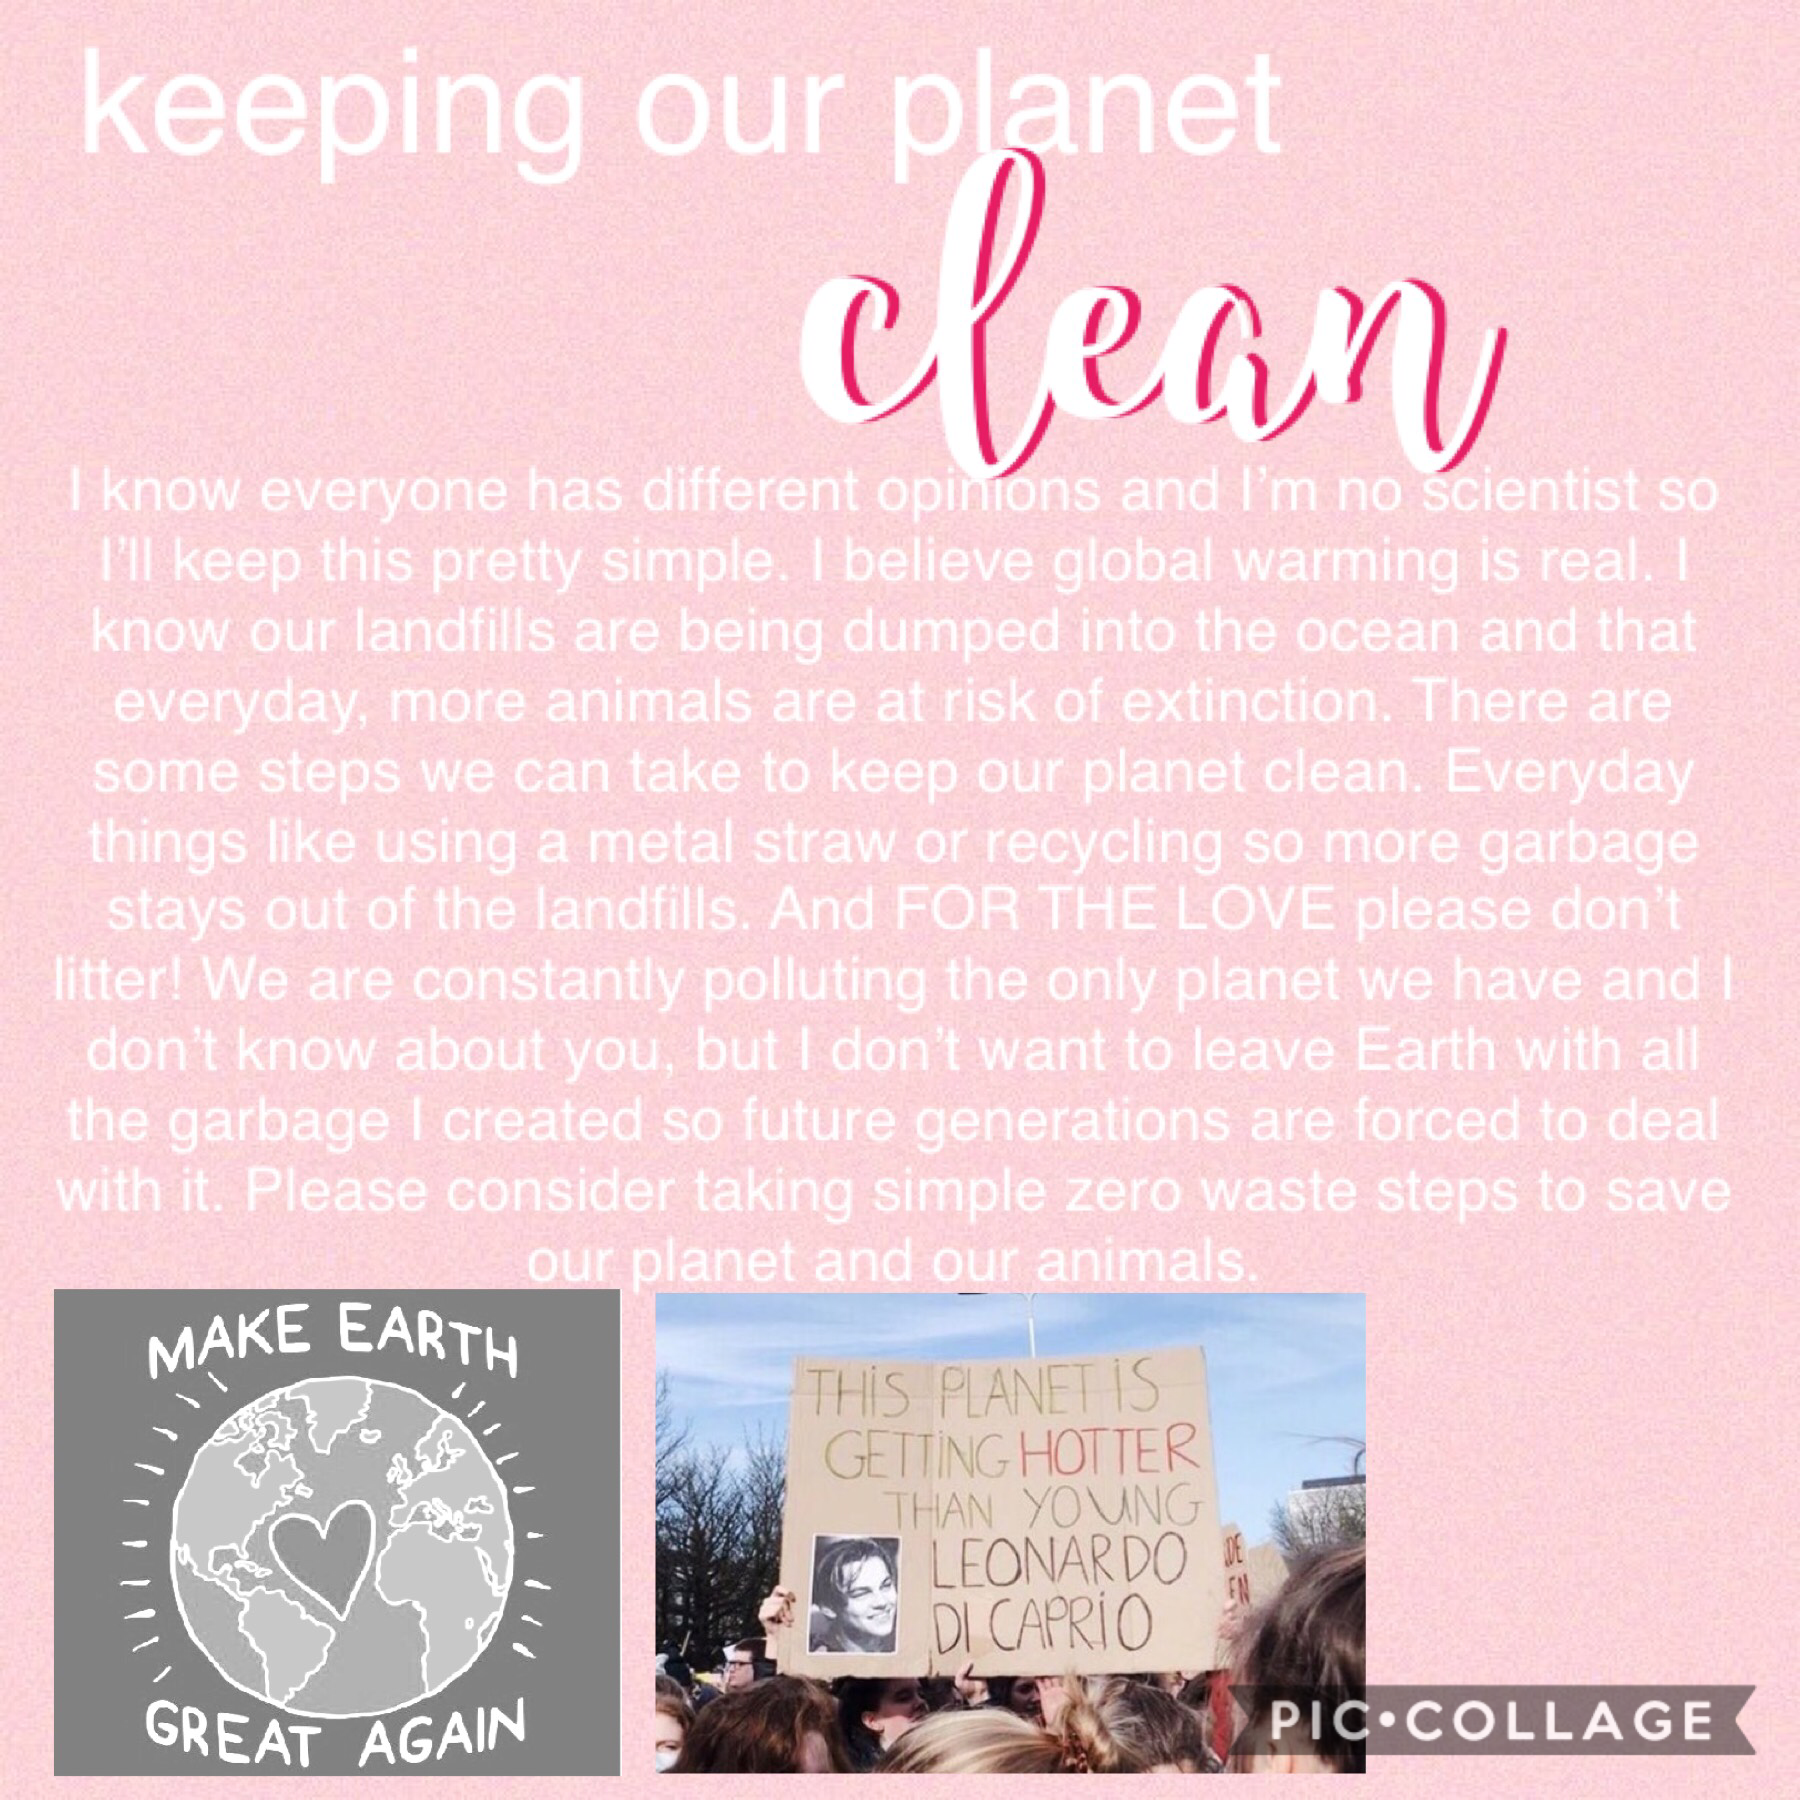 TMI warning: I started using a menstrual cup because research shows that tampons and pads take longer than a humans lifetime to degrade. It’s very convenient and environmentally friendly! I also stopped buying plastic water bottles. 